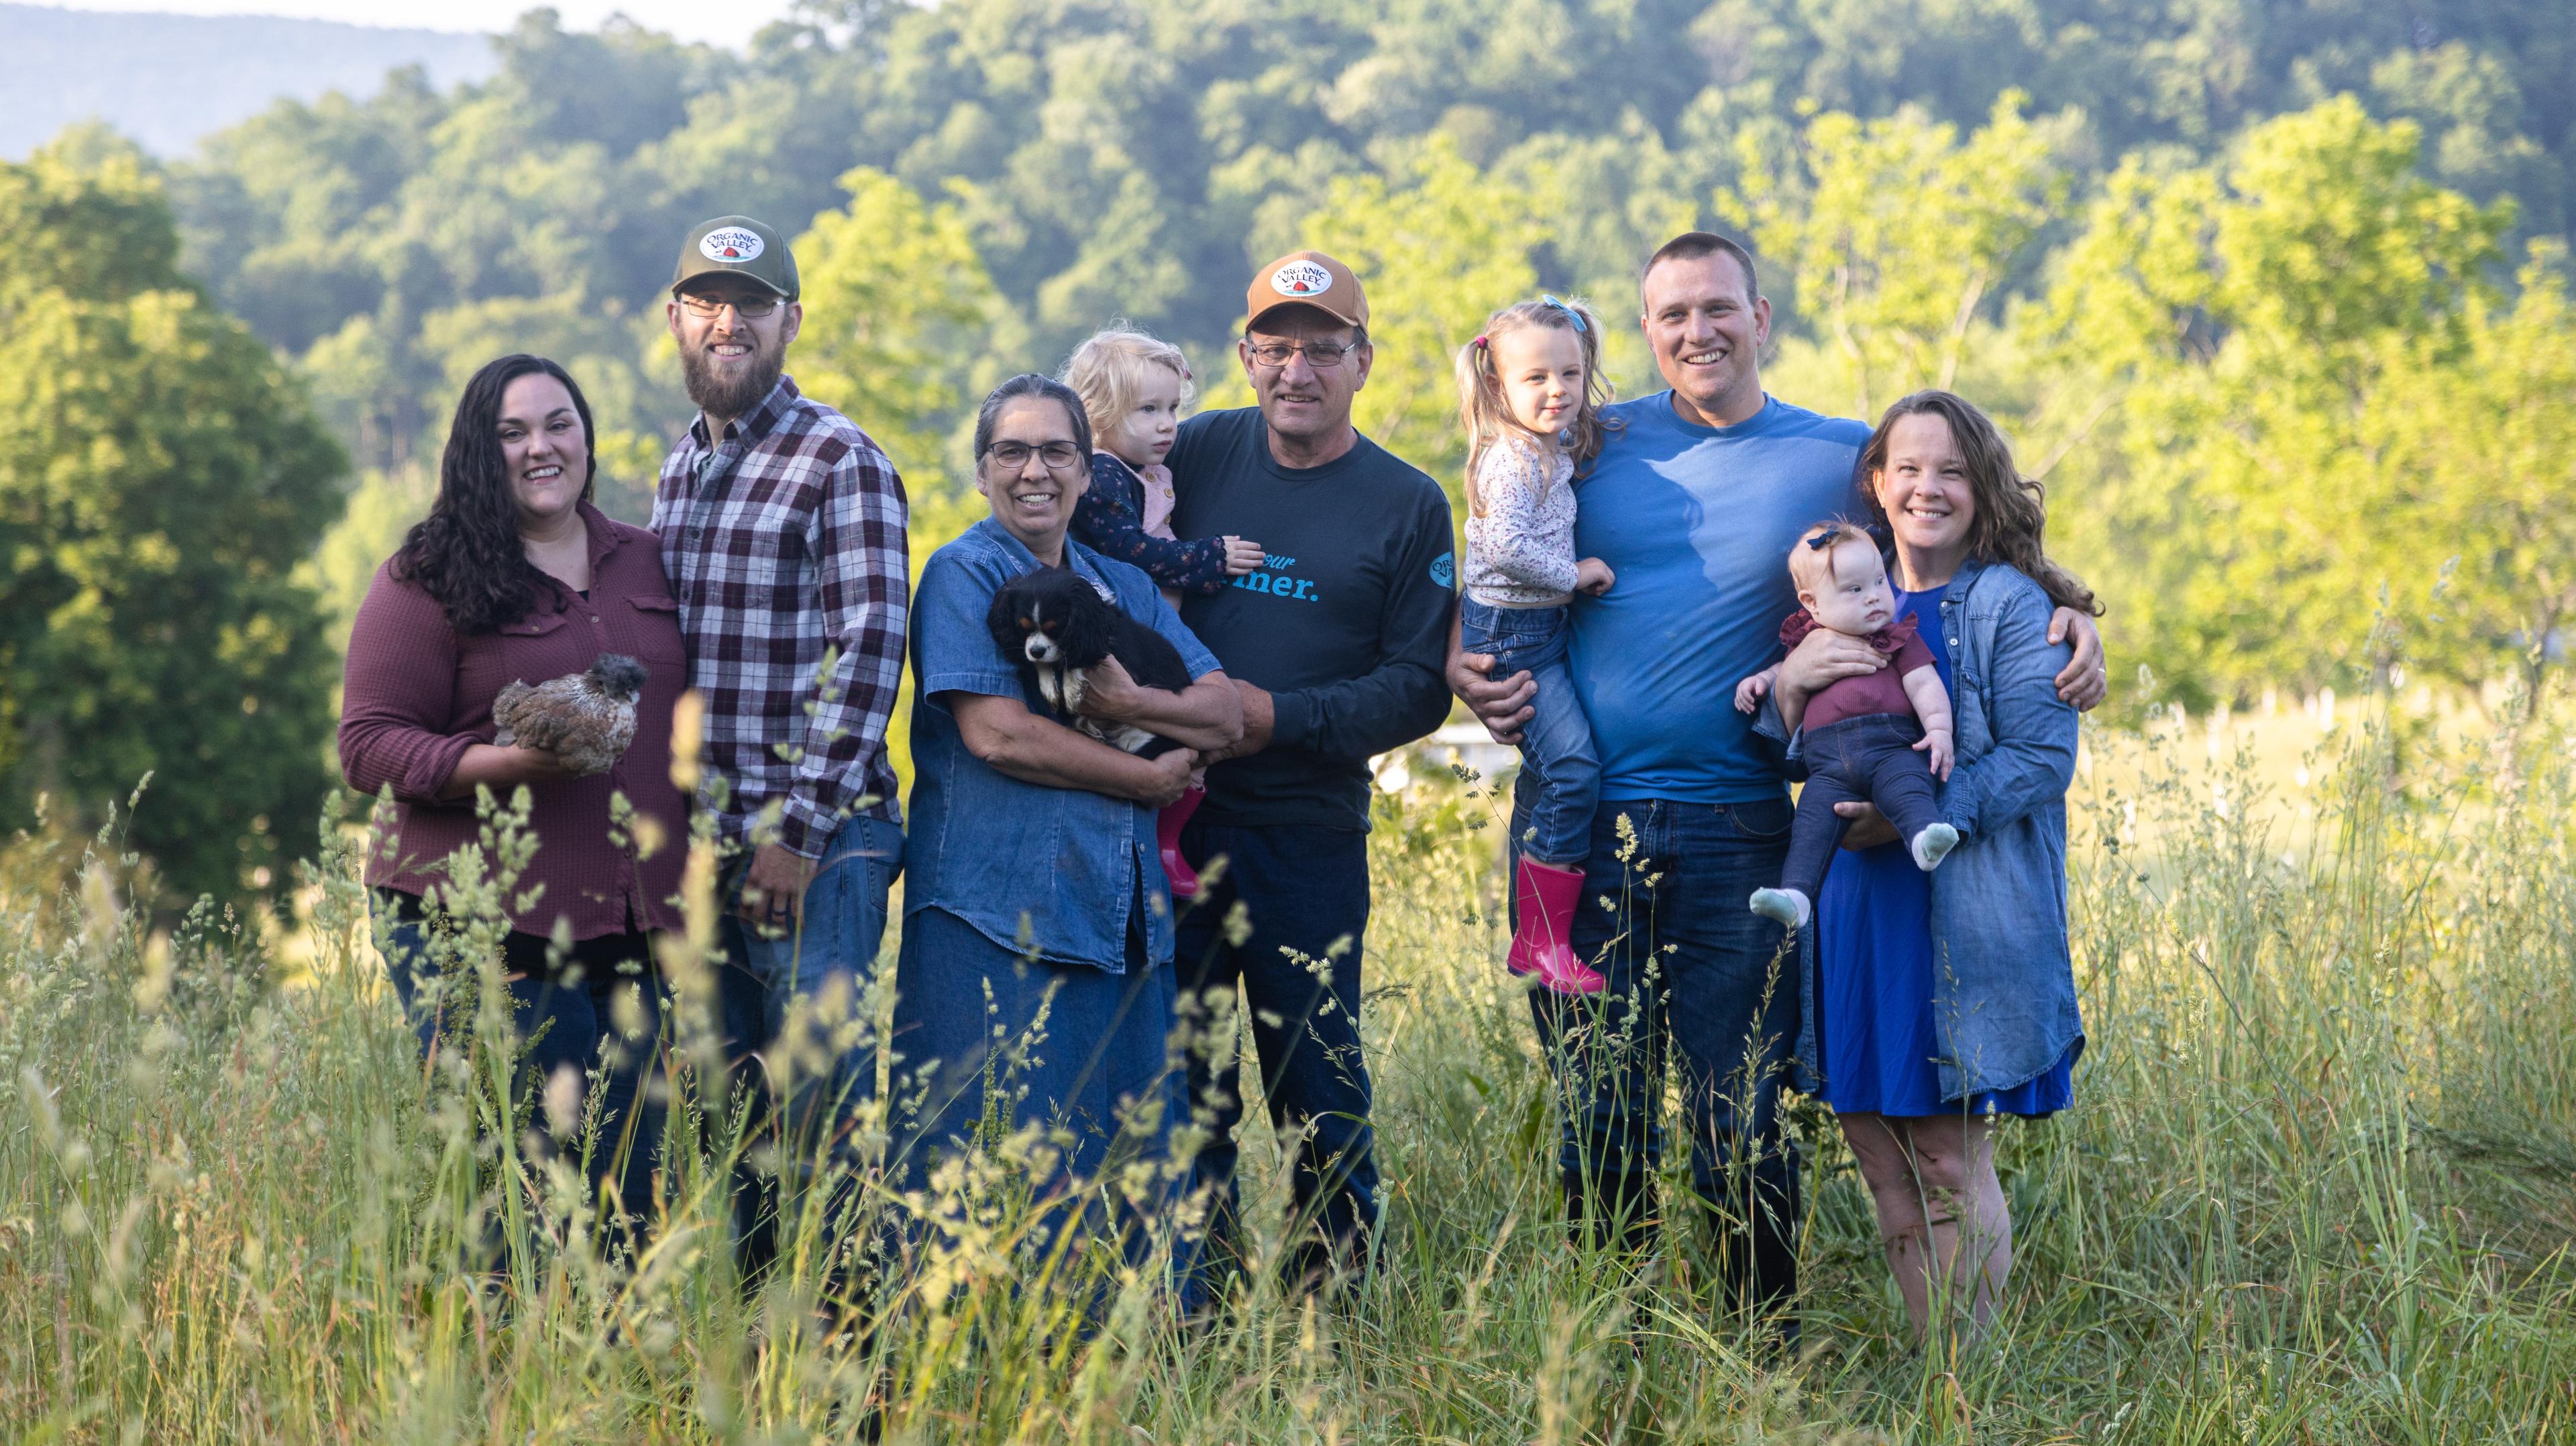 Members of the Ranck family pose in a field of grasses with trees in the background. One woman holds a dog and another holds a bird.